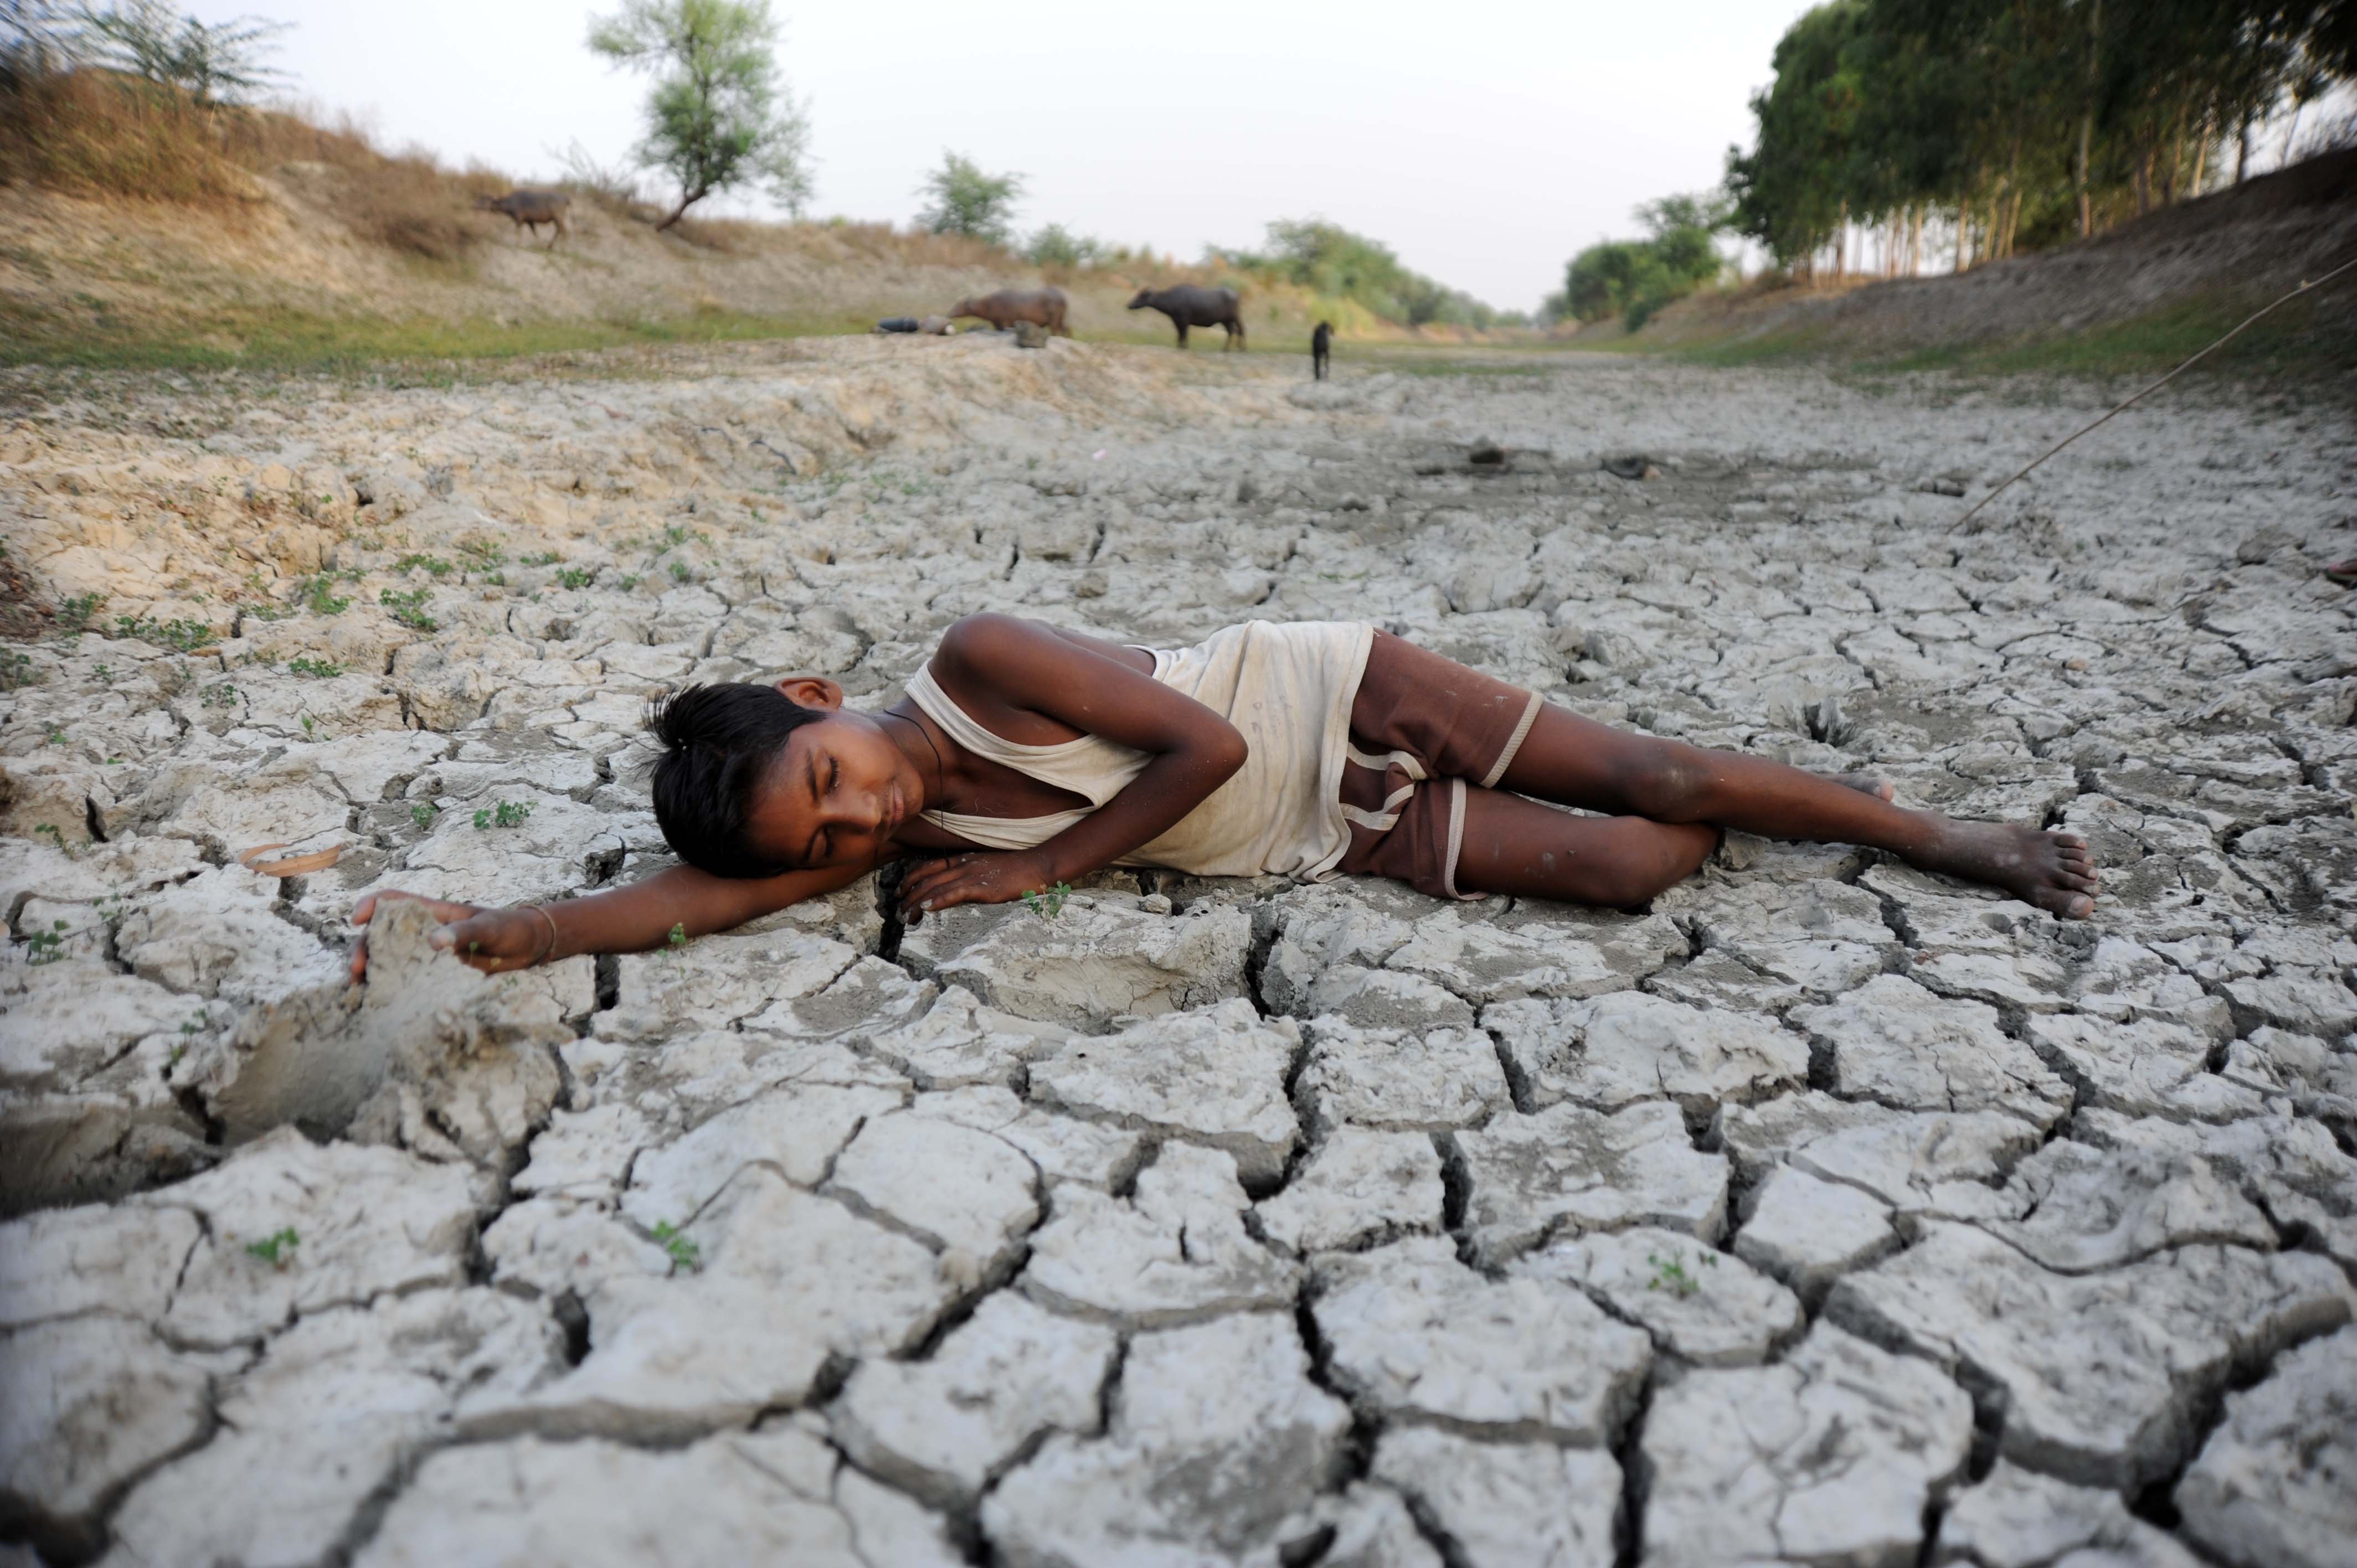 A child lies down on a dry bed of parched mud that is the dried-up Varuna River in the Indian village of Phoolpur on May 14 2016 (Kumar Verma—Pacific Press/LightRocket/Getty Images)